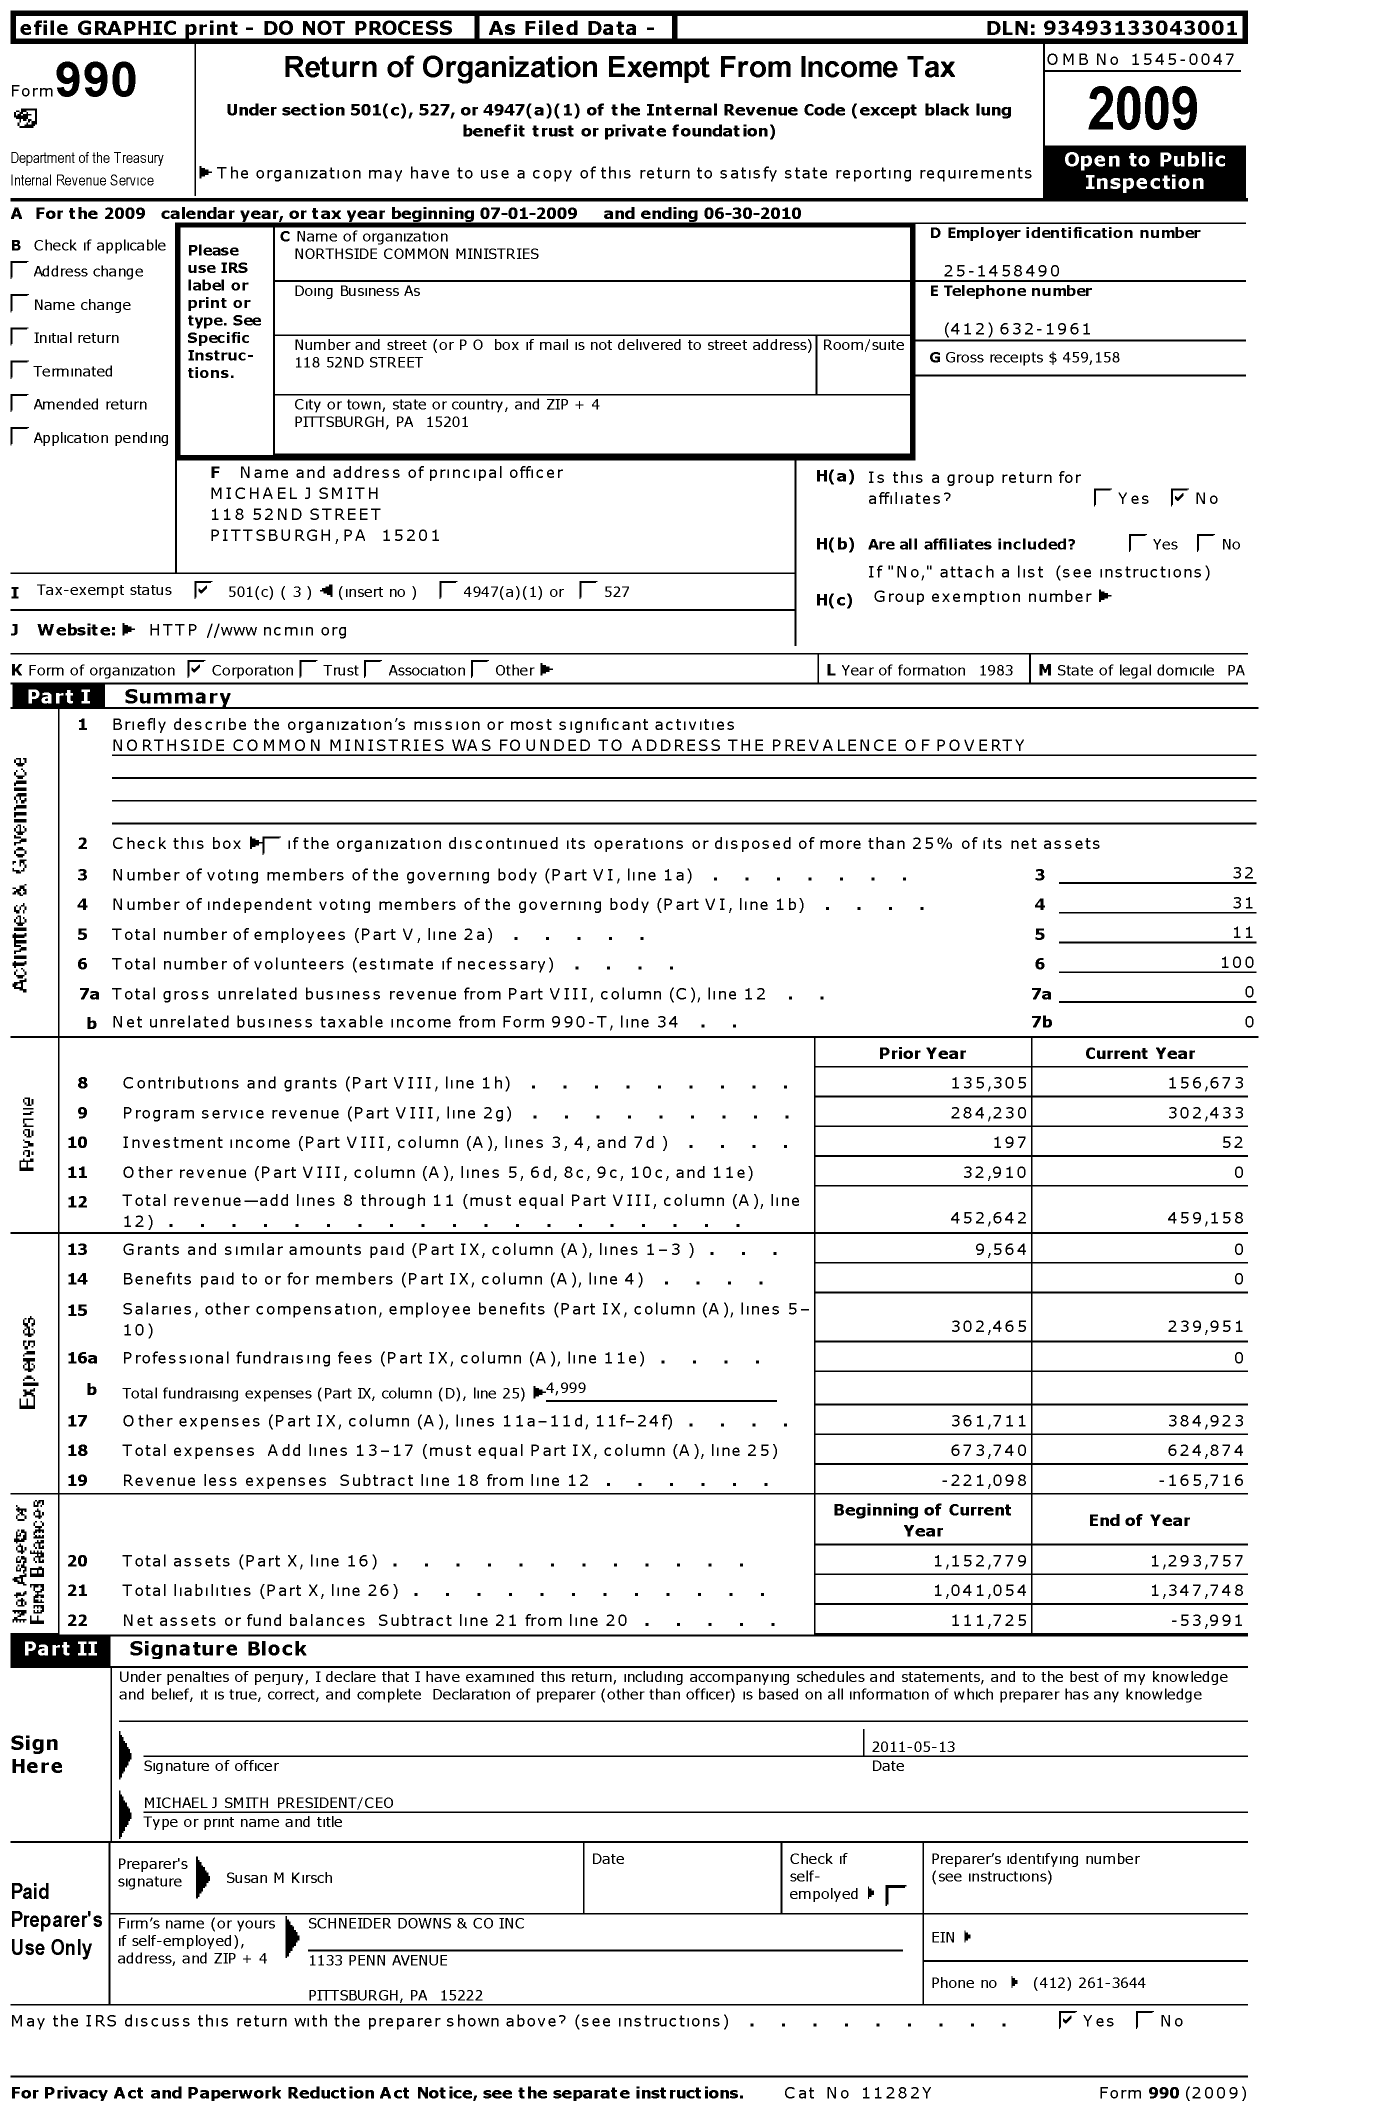 Image of first page of 2009 Form 990 for Northside Common Ministries